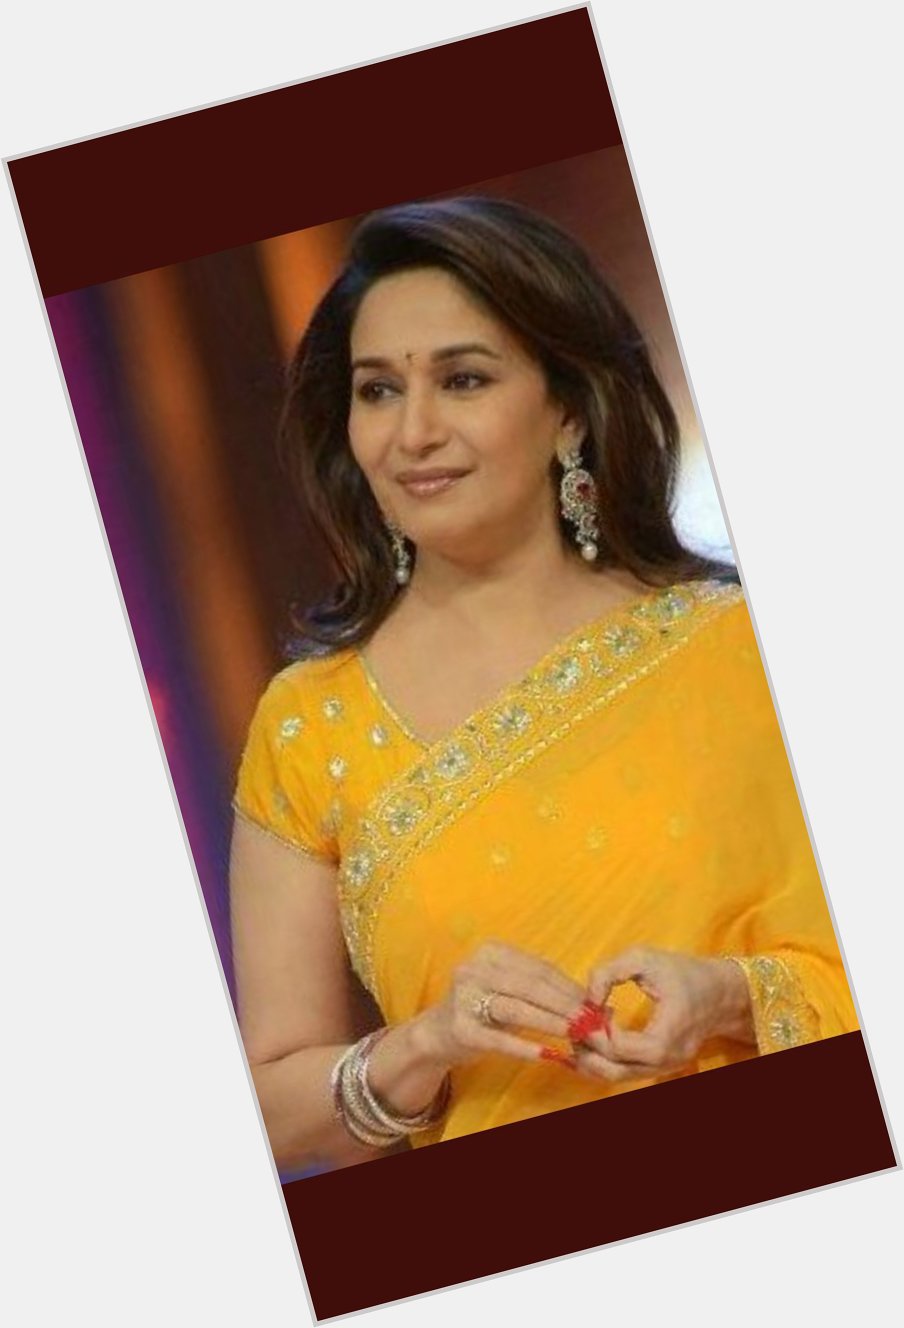 Happy birthday to the prettiest actress in bollywood, the superstar, the evergreen Madhuri Dixit  